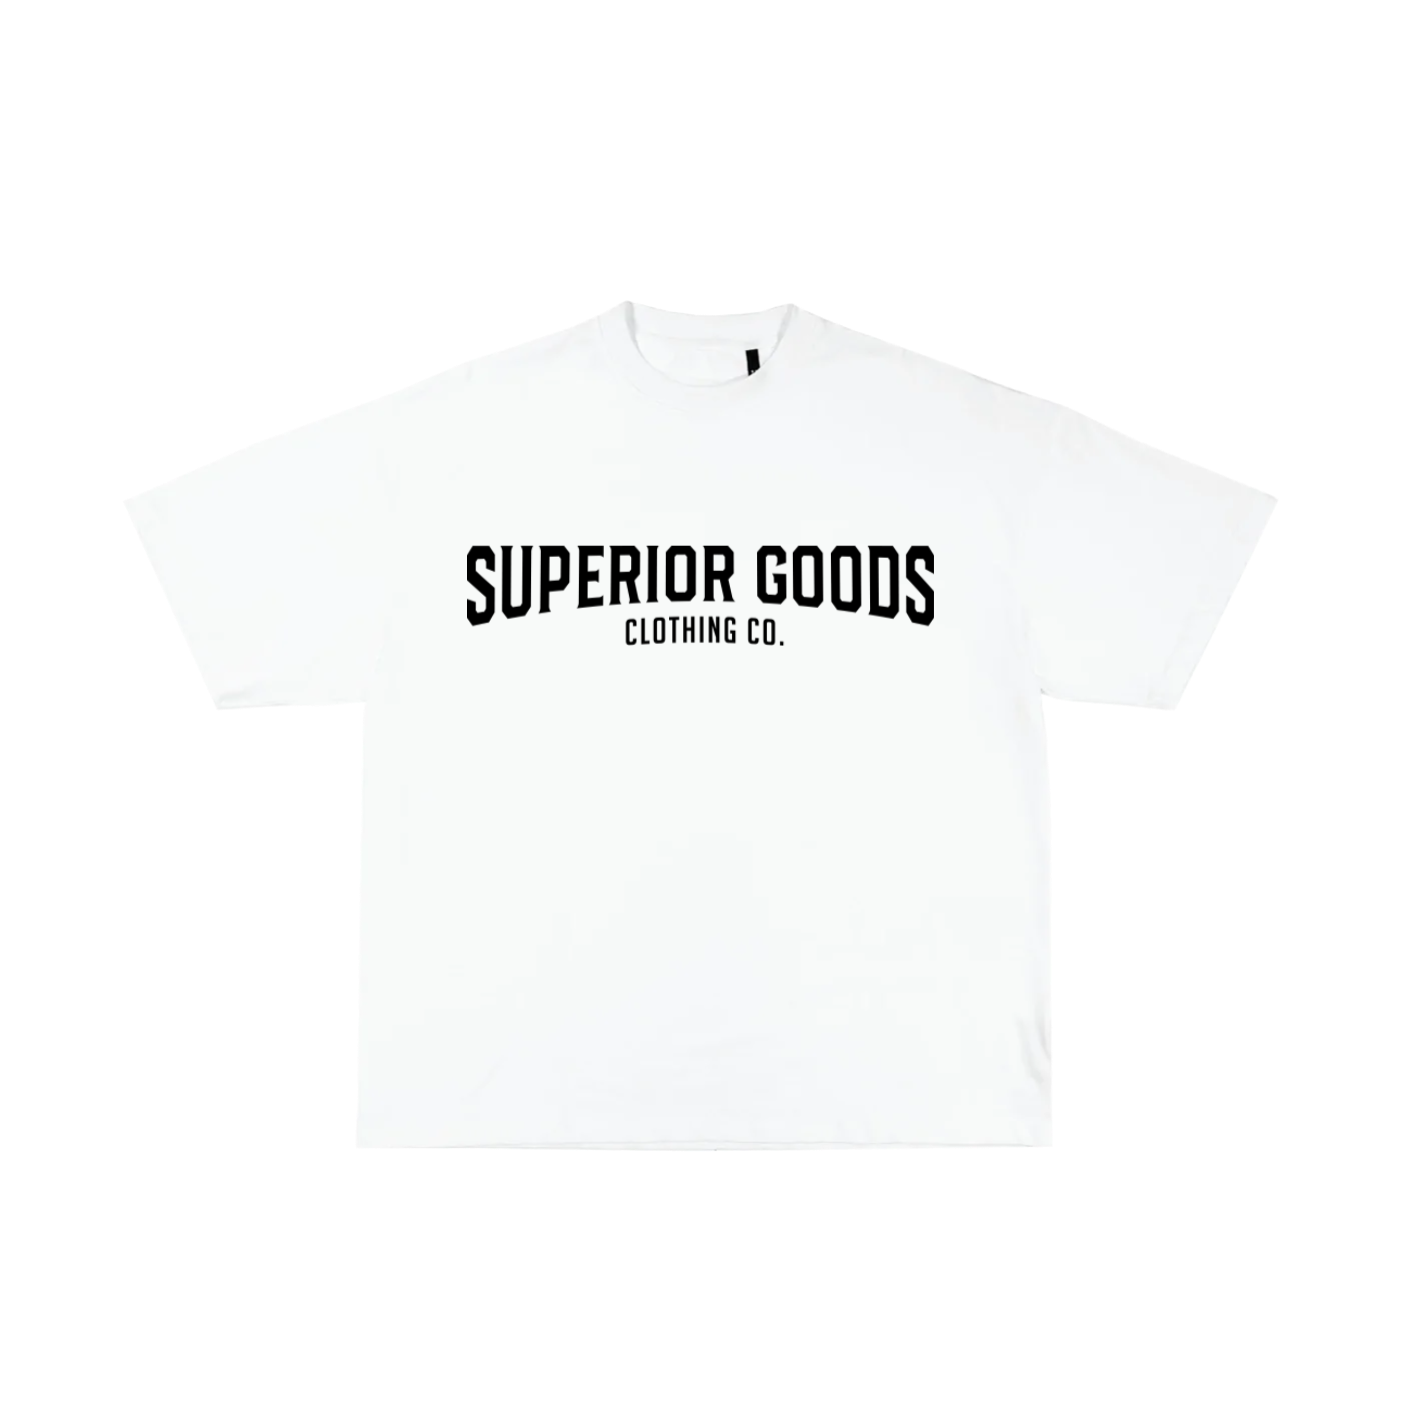 A white t-shirt with black text logo in bold font on the front.